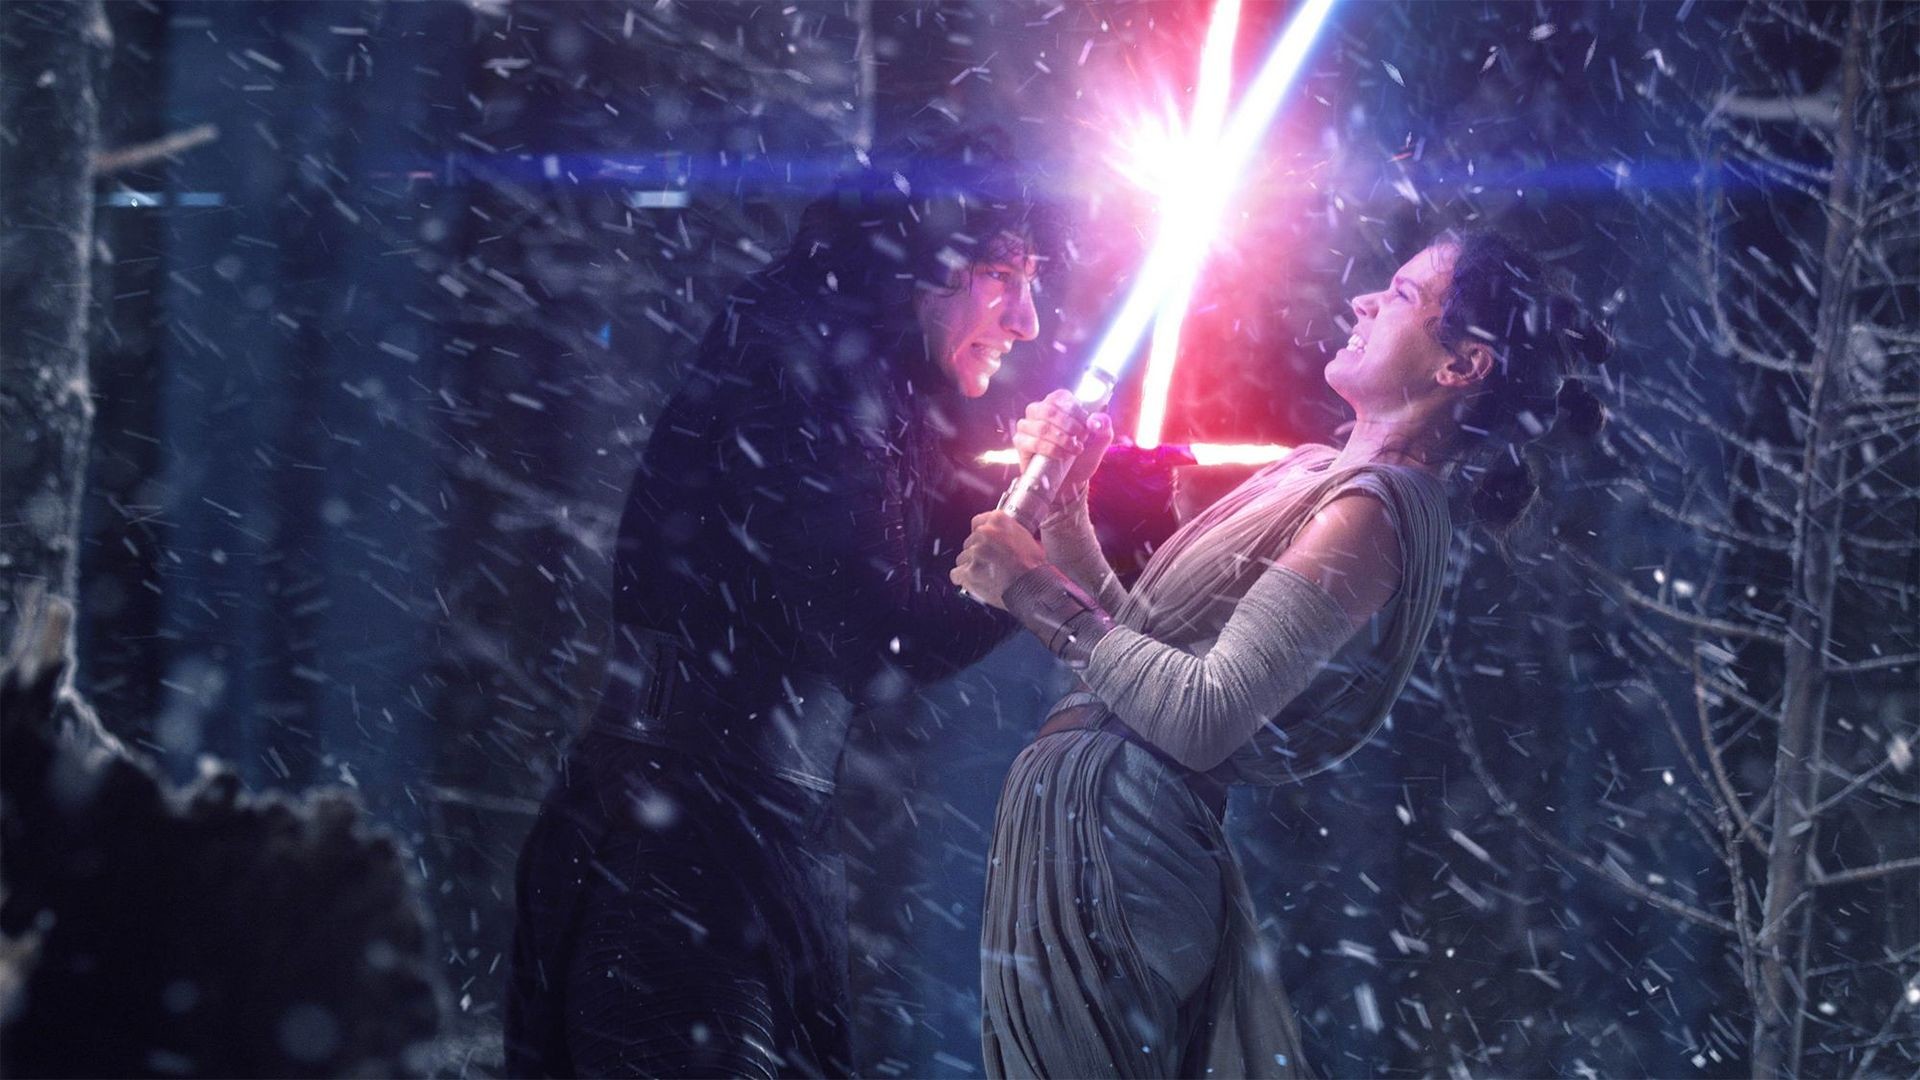 1920x1080 Image result for rey and kylo ren